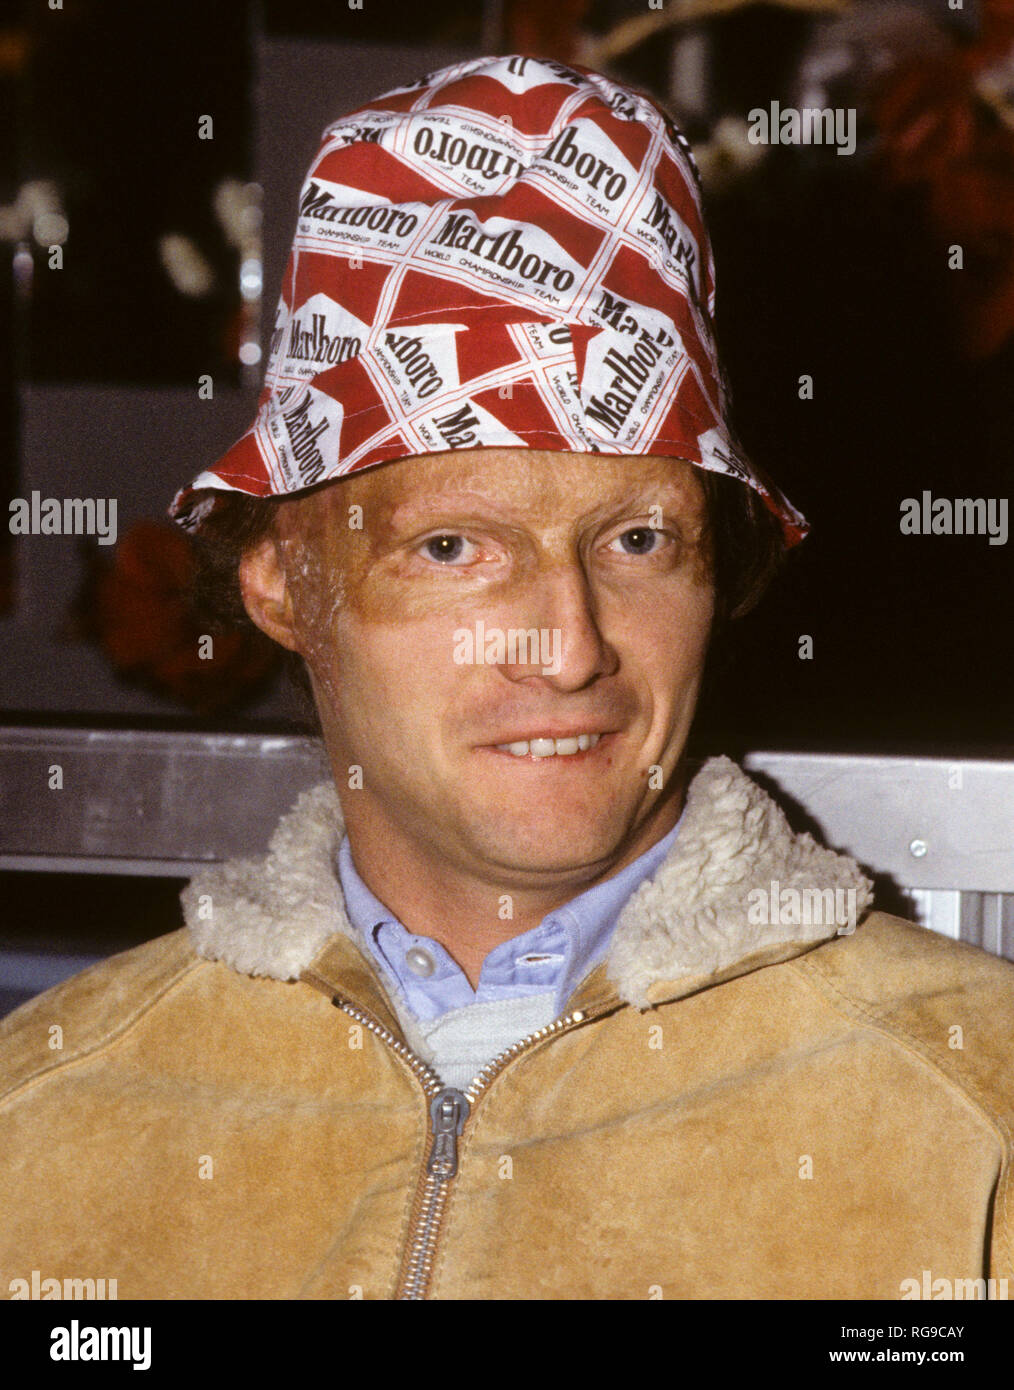 NIKI LAUDA Austrian formula one driver with a face damaged after accident  Stock Photo - Alamy